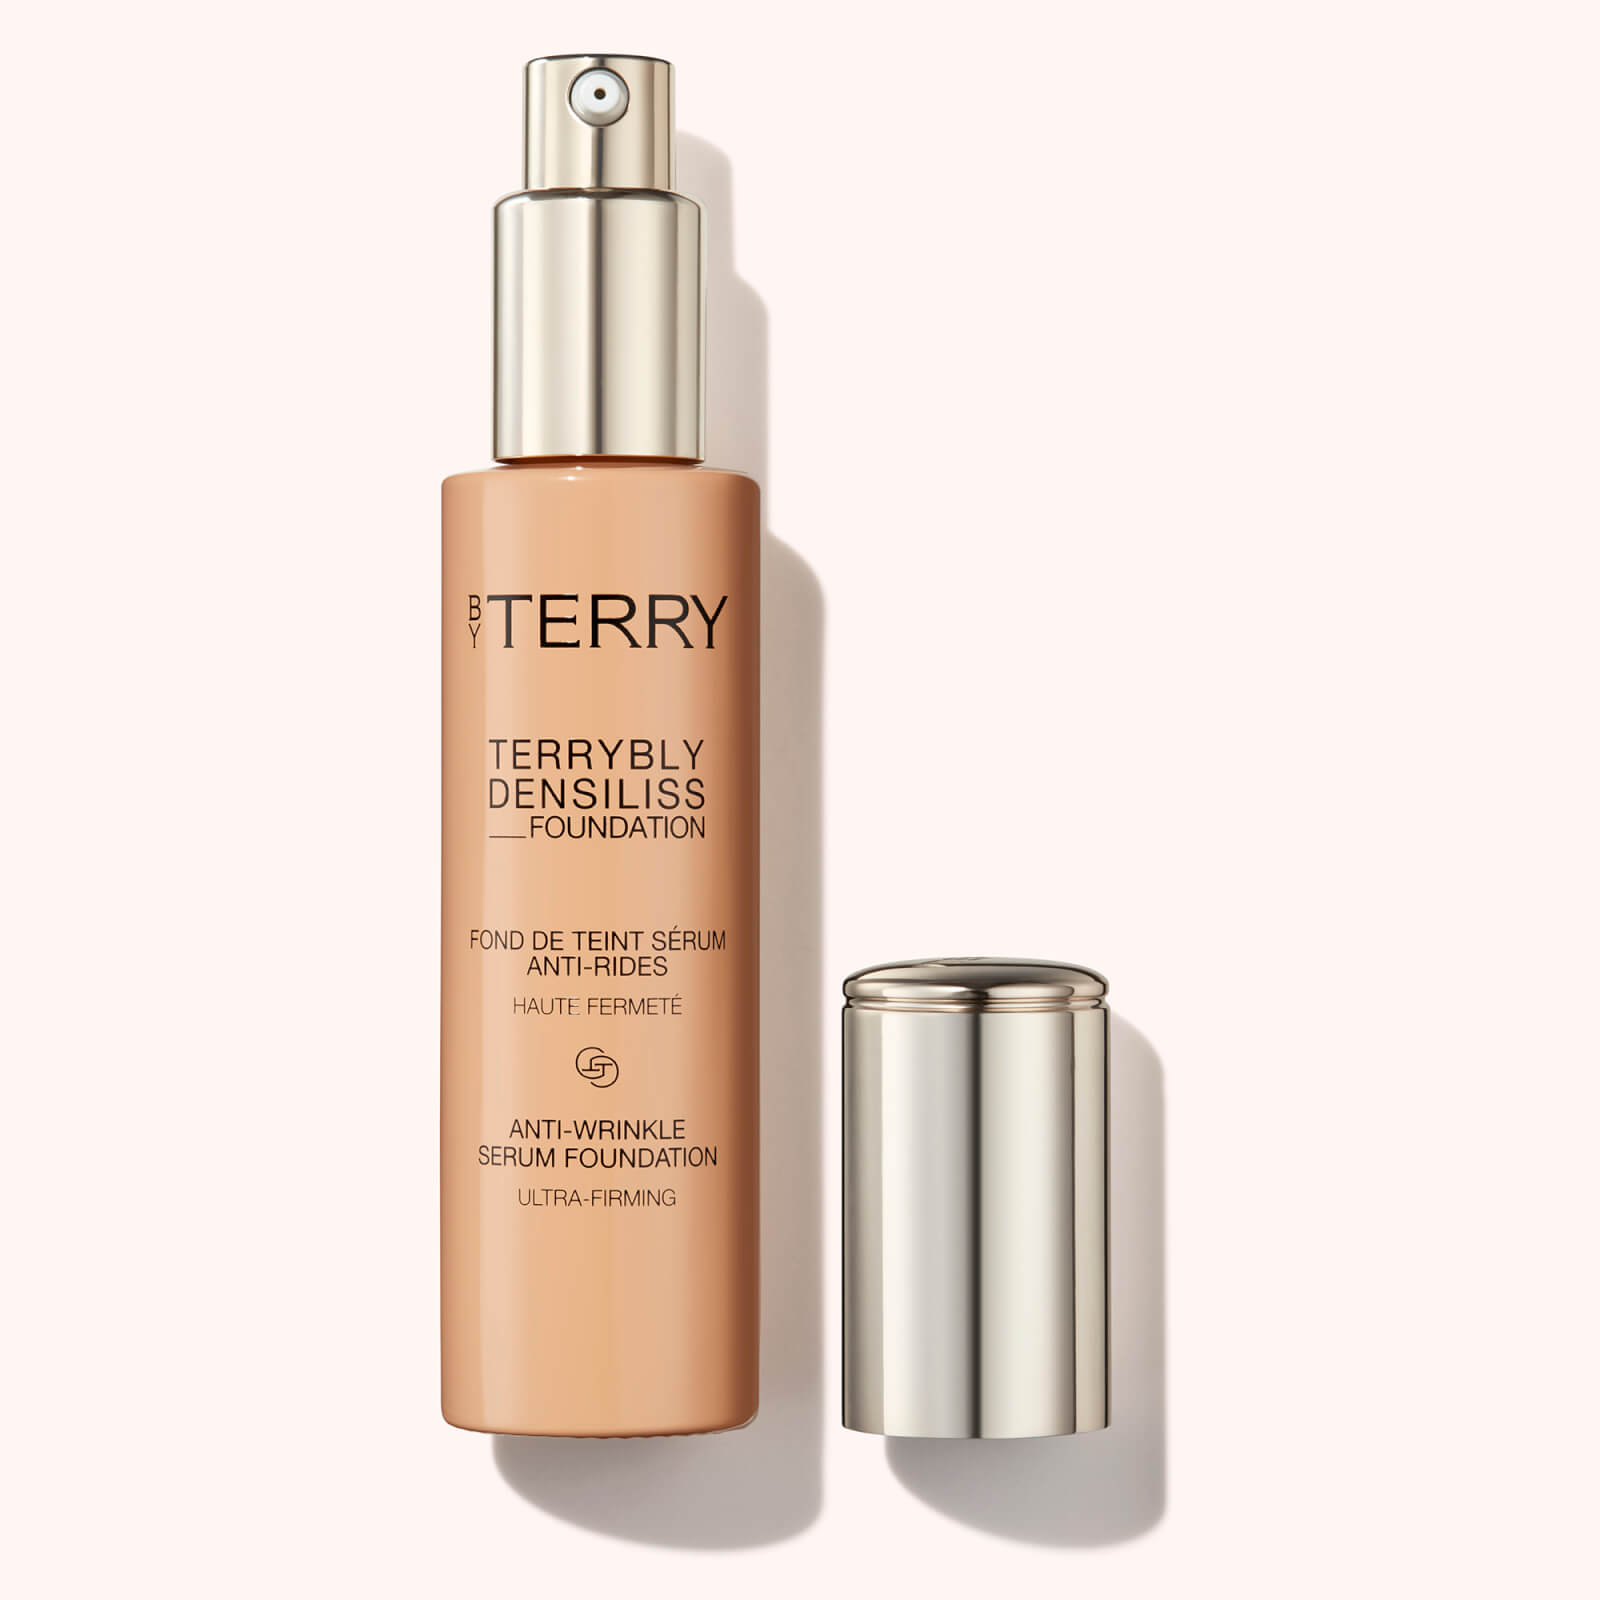 By Terry Terrybly Densiliss Foundation 30Ml (Various Shades) - 7. Golden Beige